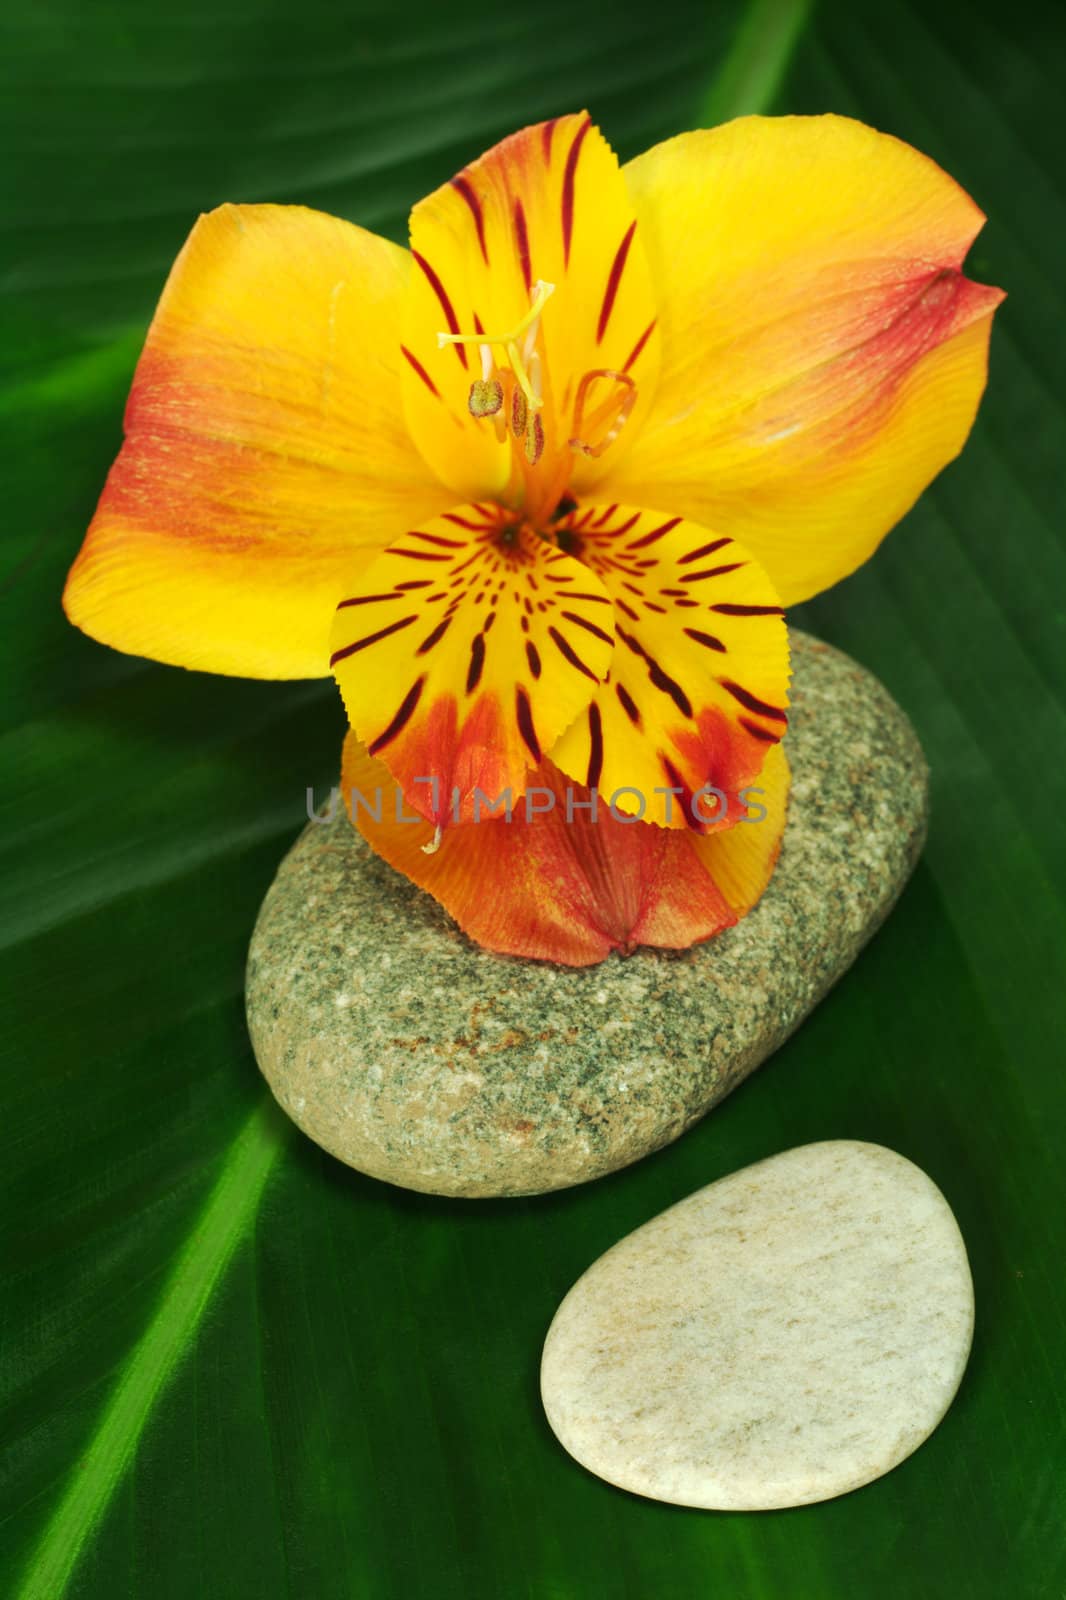 Freesia Blossom with Leaf and Stones by ildi